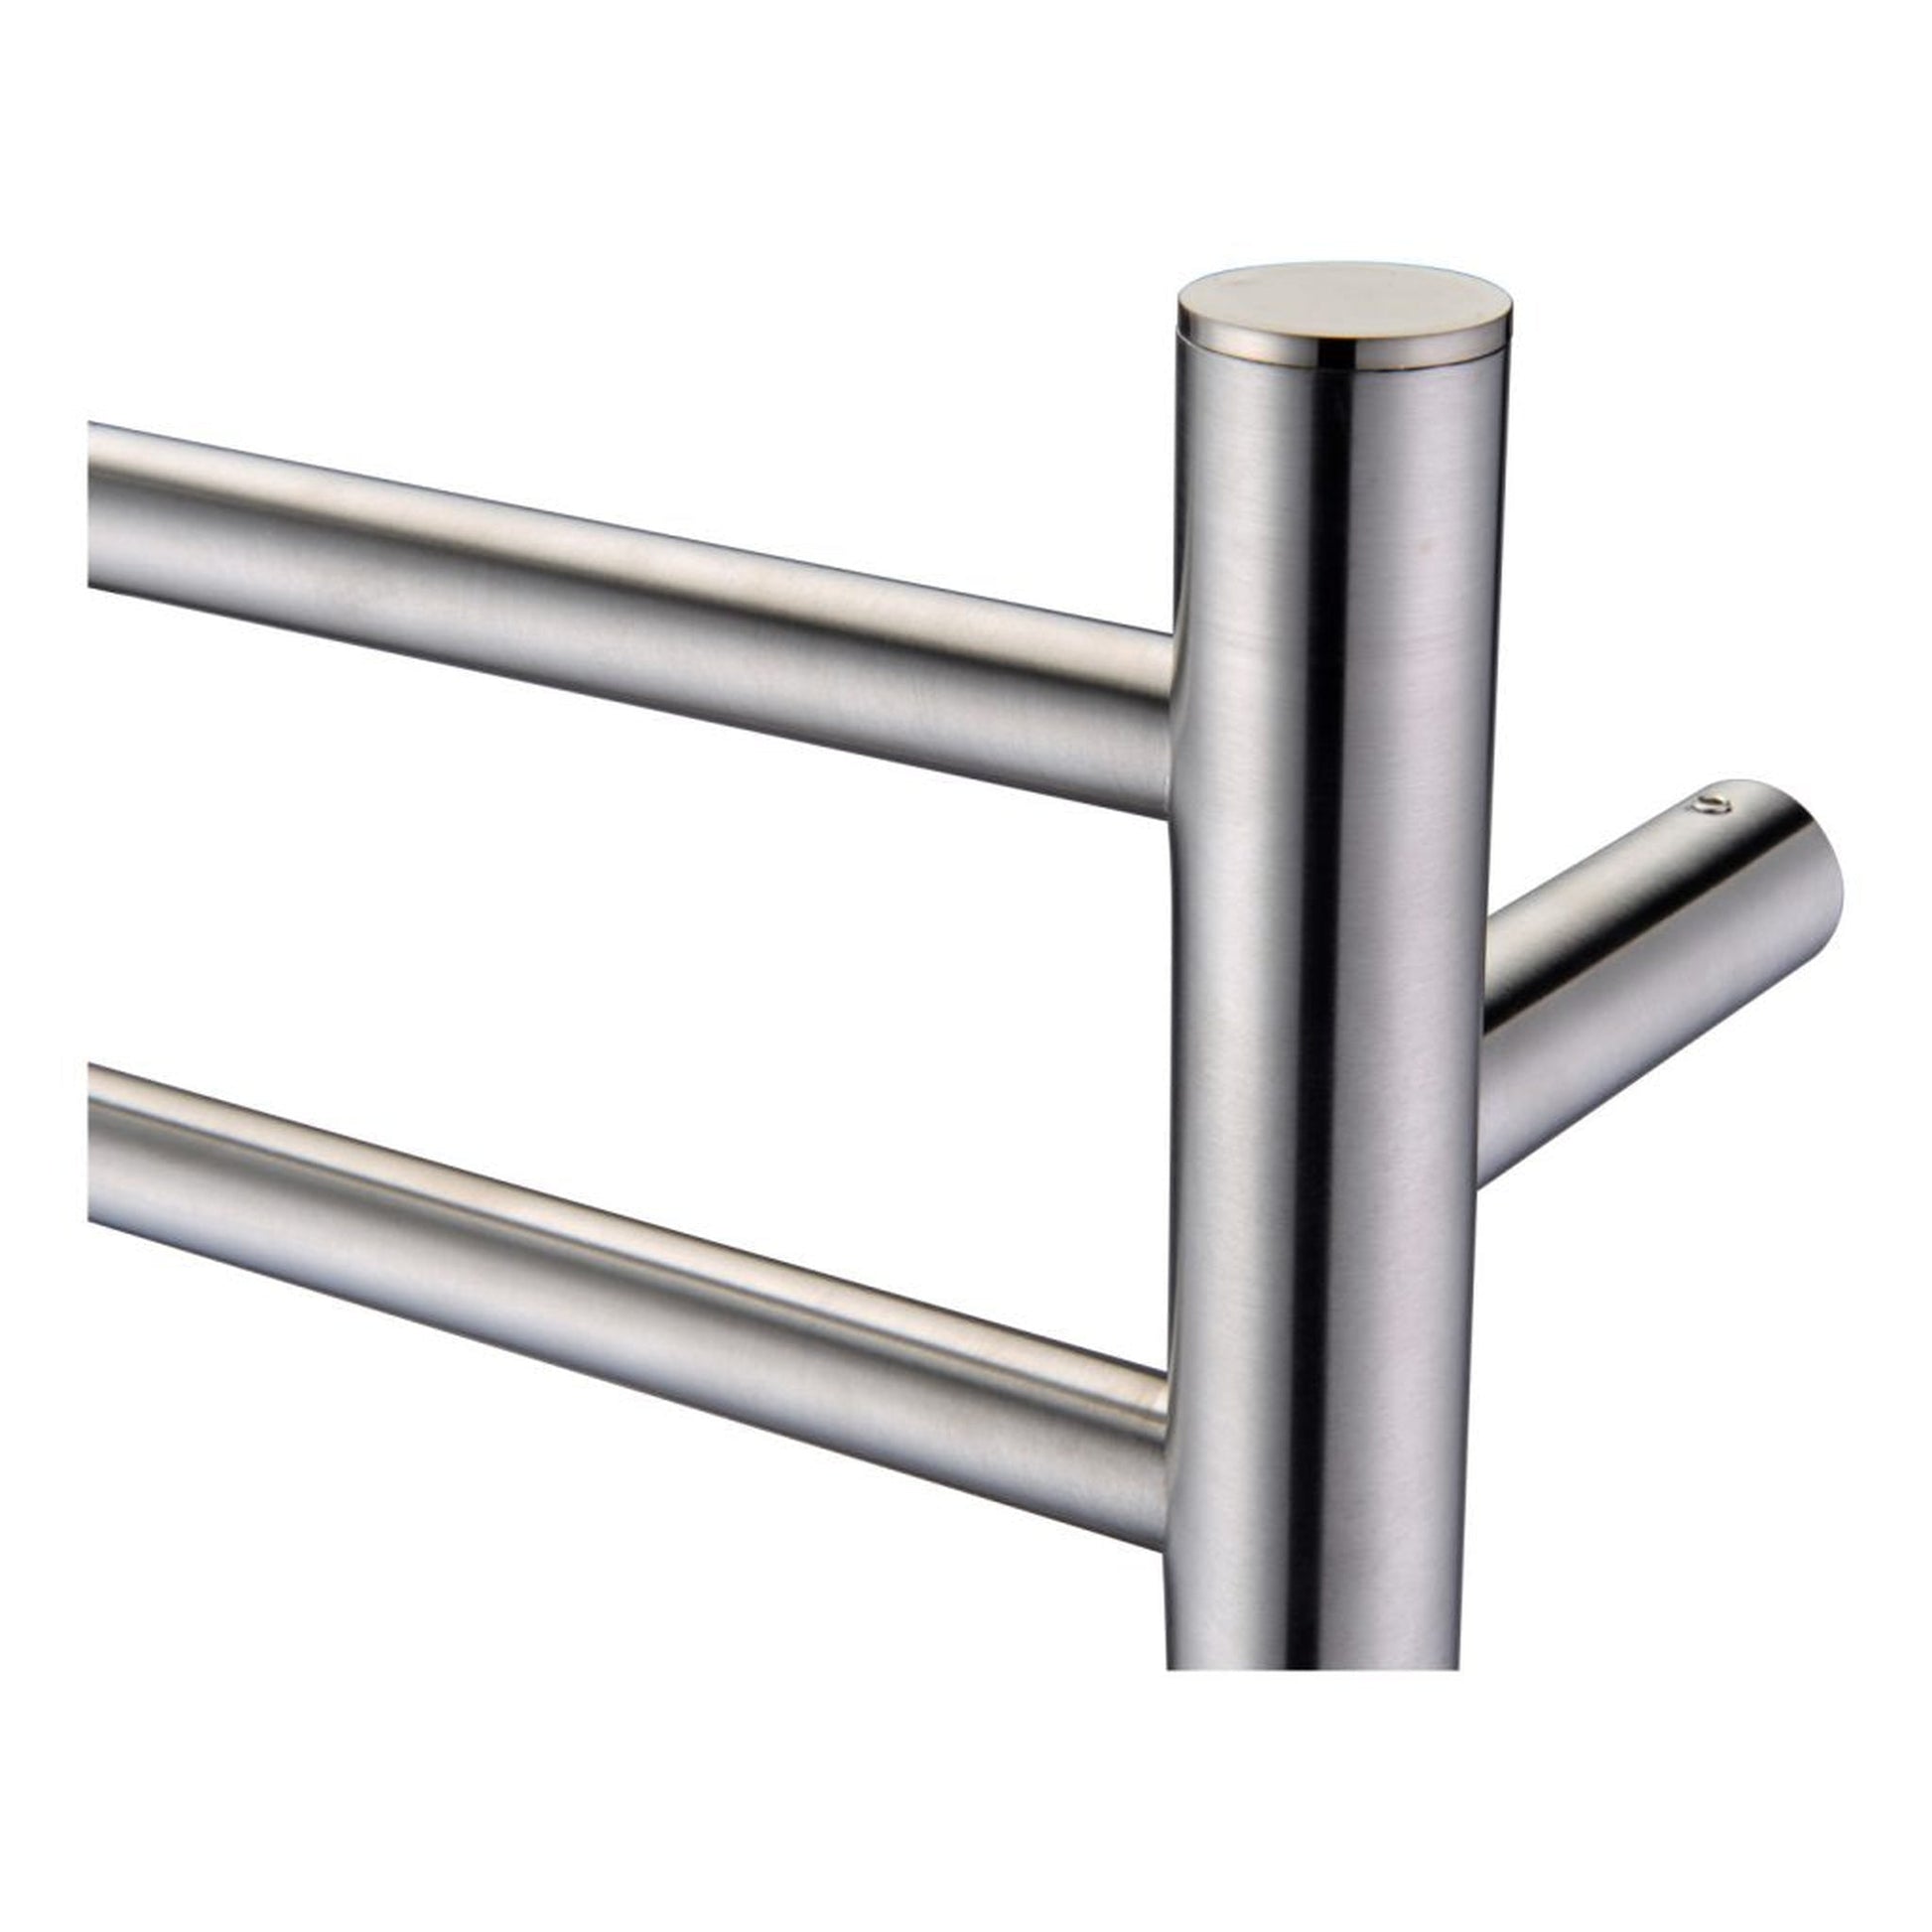 ANZZI Gown Series 7-Bar Stainless Steel Brushed Nickel Wall-Mounted Electric Towel Warmer Rack